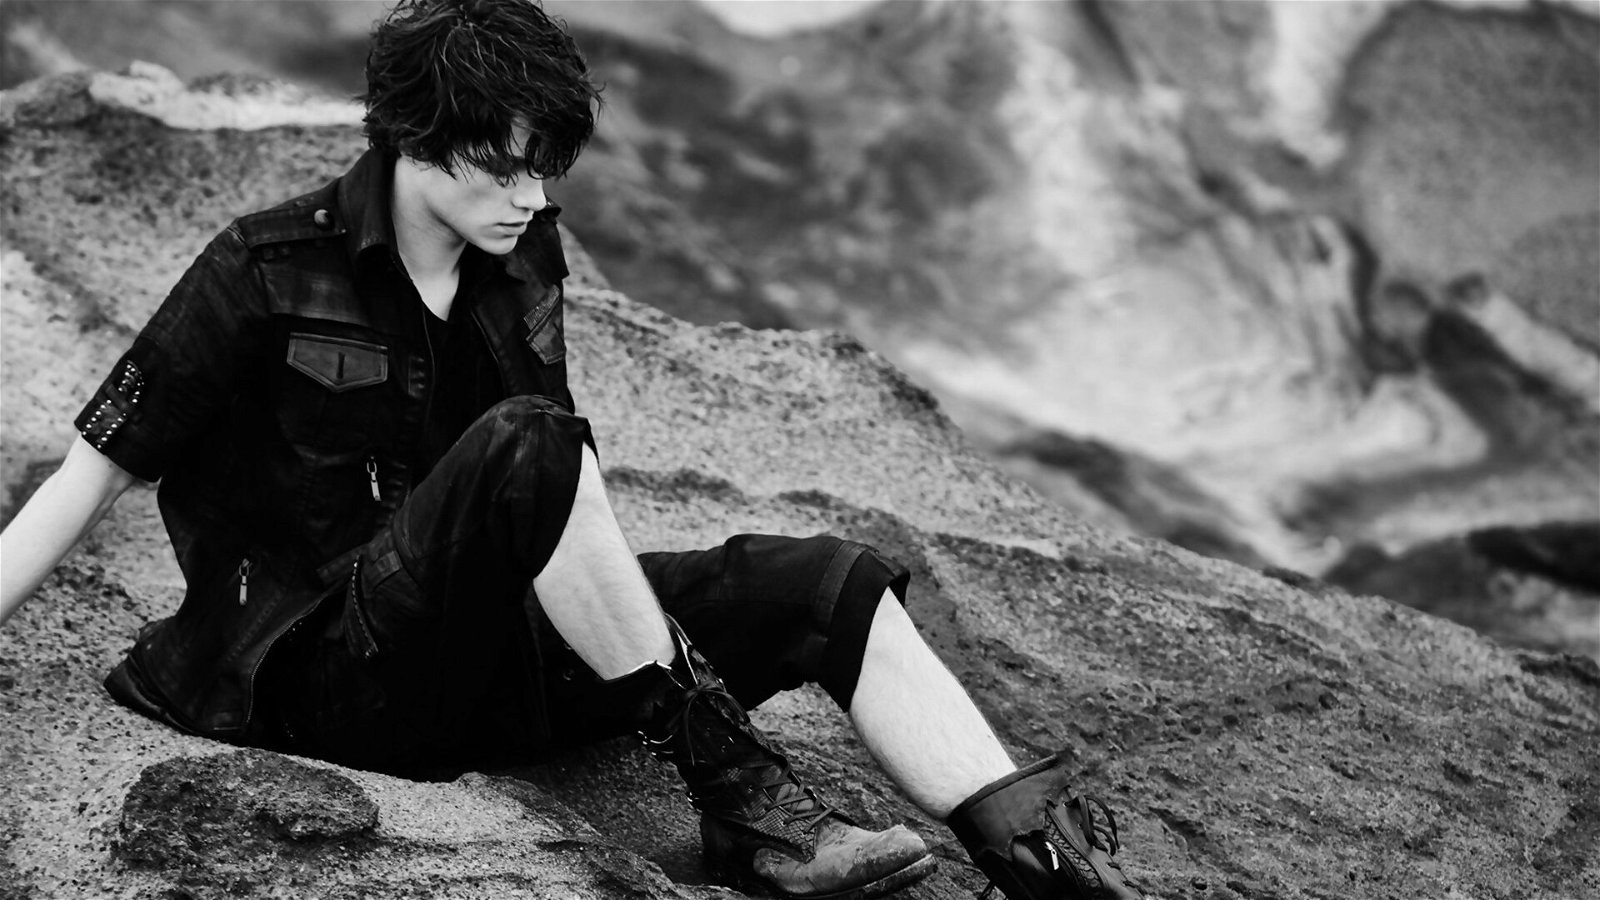 New Final Fantasy XV clothing line by Roen 5